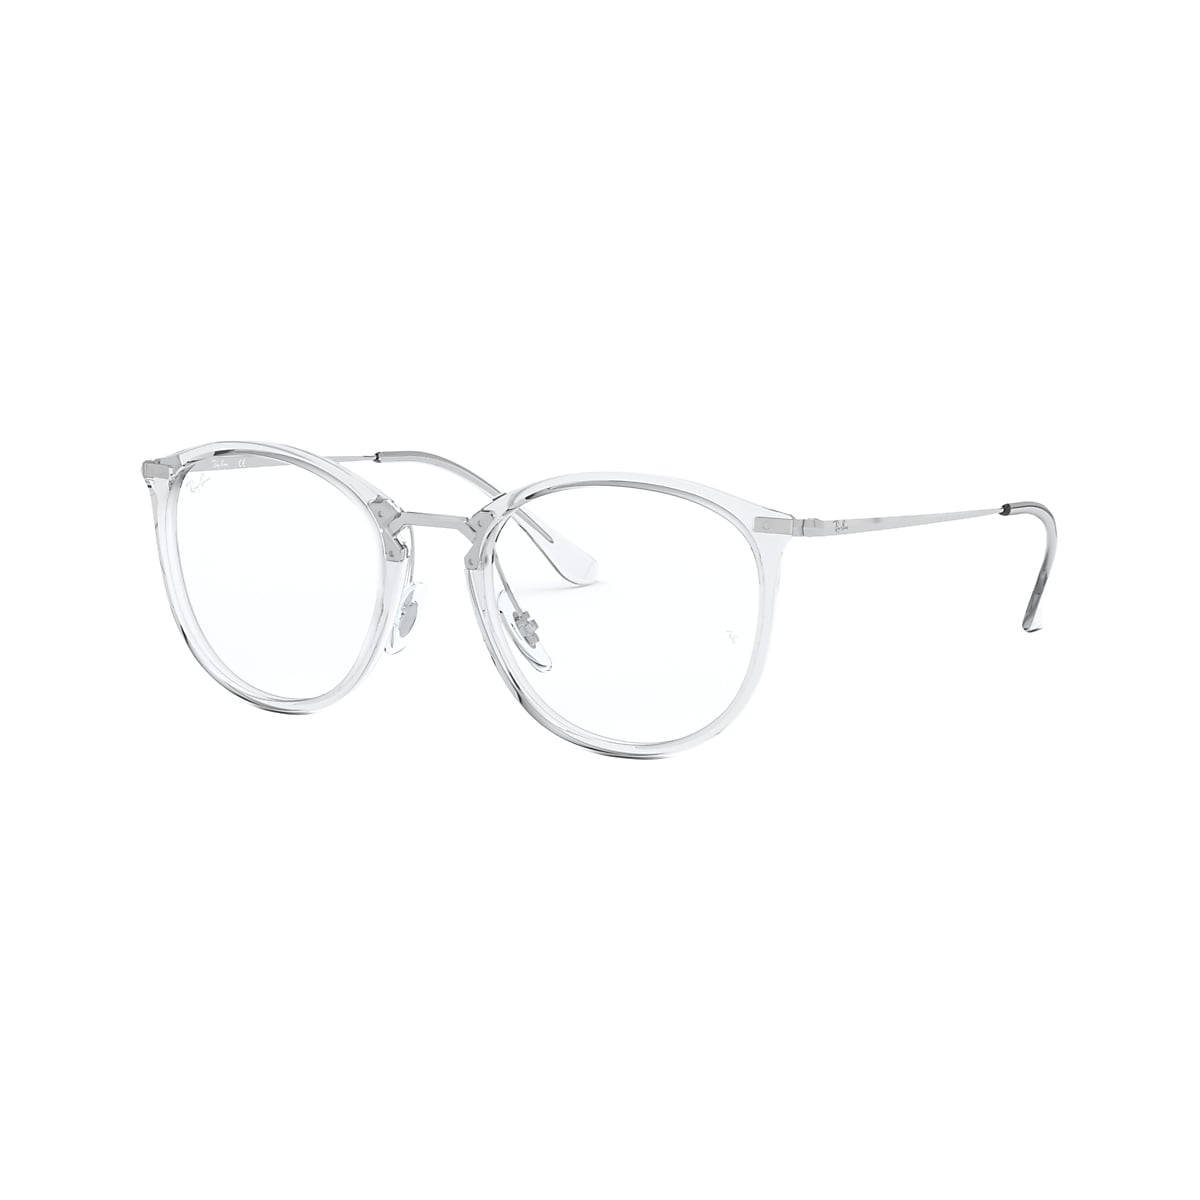 Ray-Ban 0RX7140 Glasses in Clear/white | Target Optical